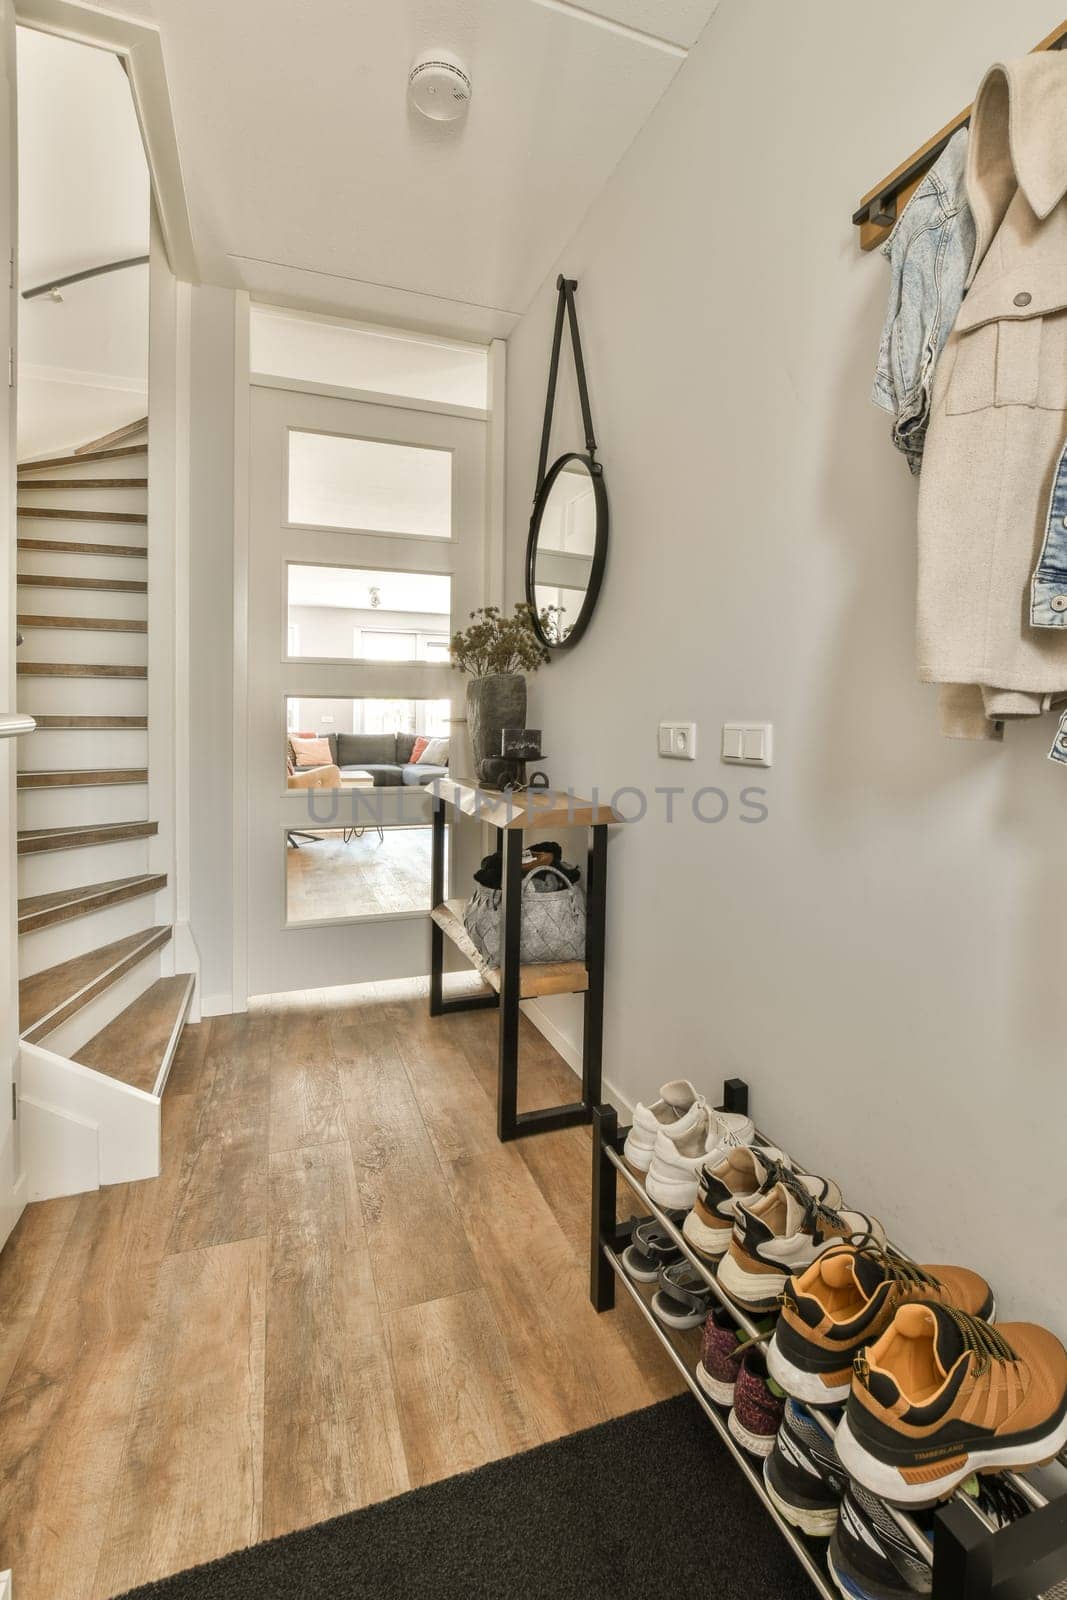 the inside of a house with some shoes hanging on the wall and stairs in the room is very well organized